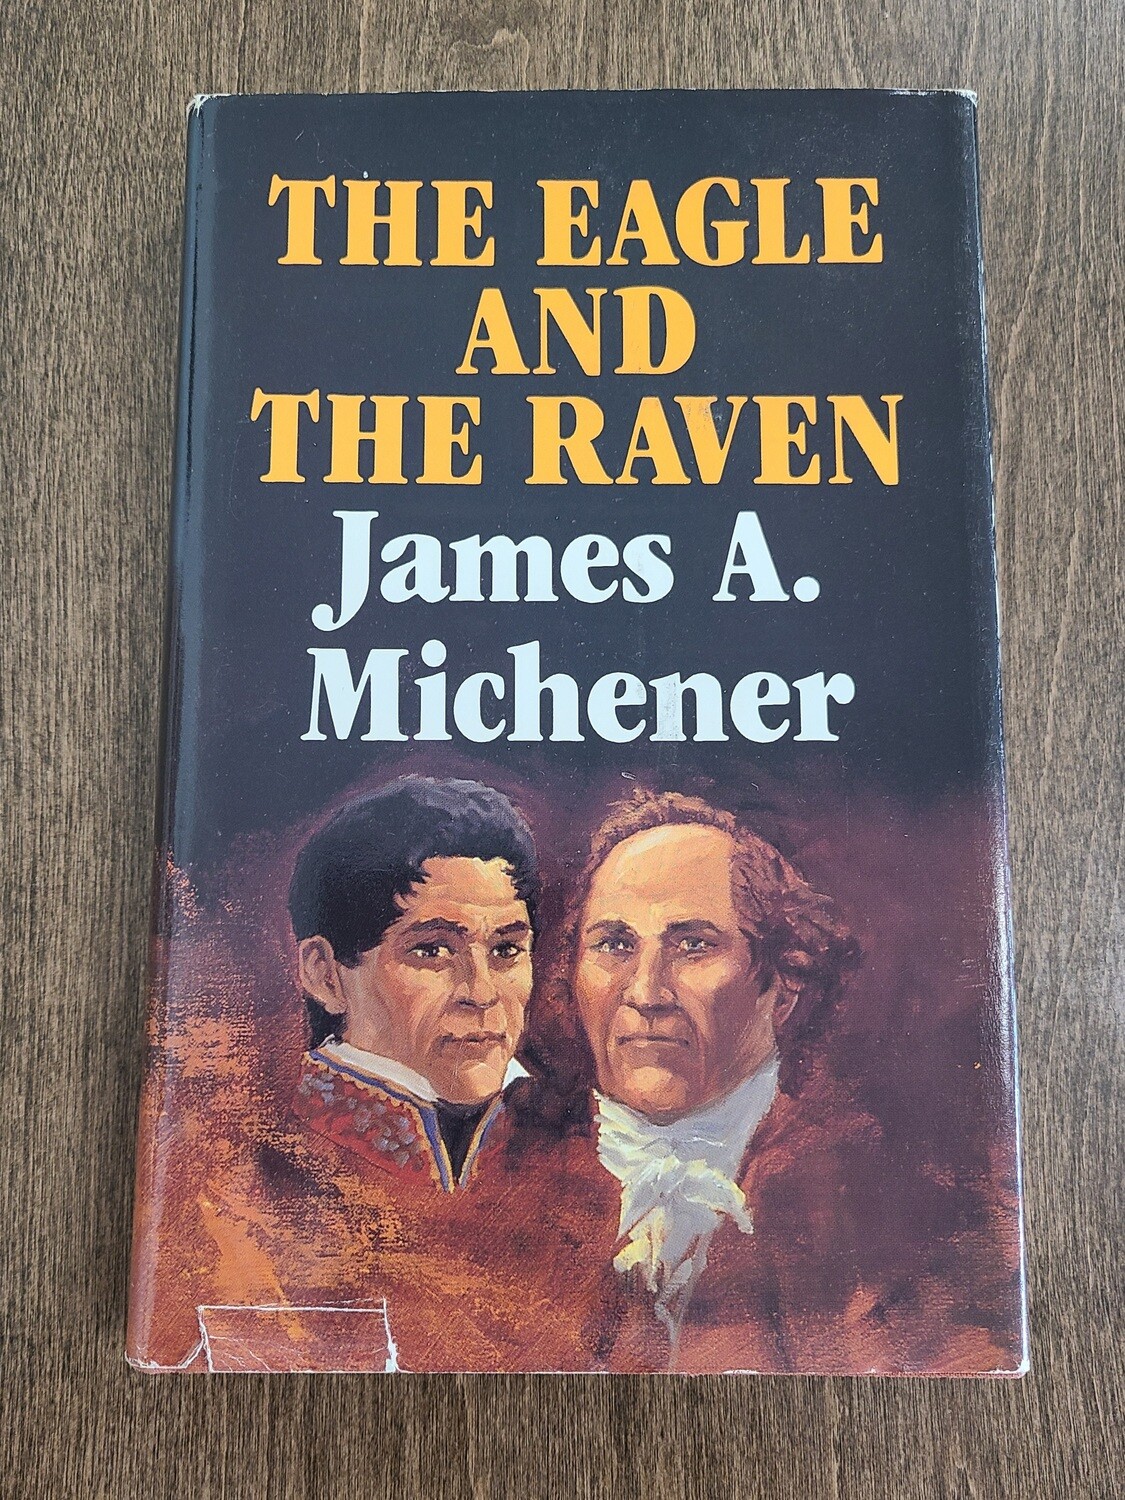 The Eagle and the Raven by James A. Michener